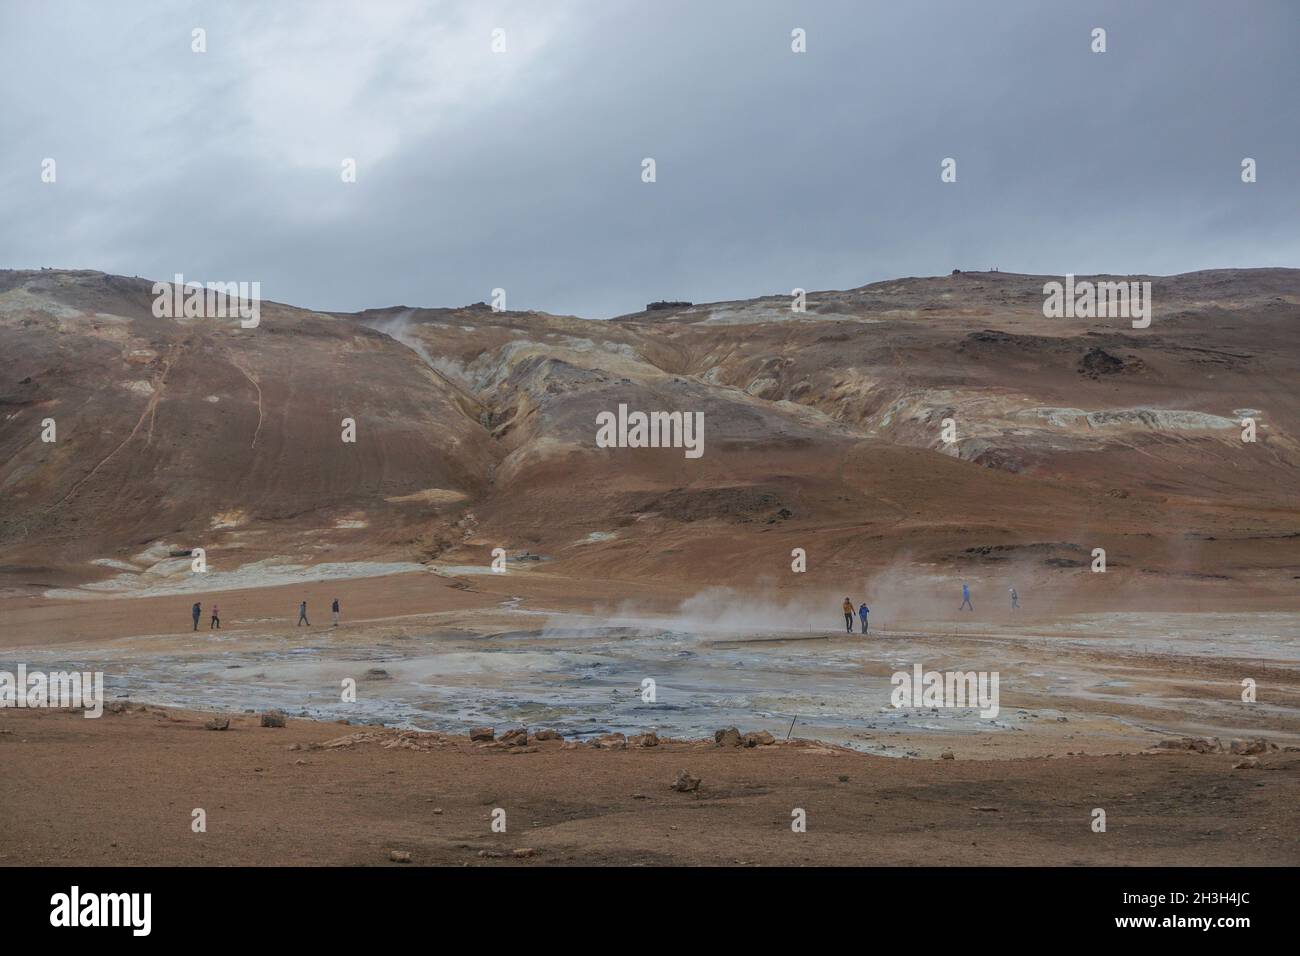 Myvatn Region, Iceland: Namafjall (also known as Hverir) is a high-temperature geothermal area with boiling mud pots and steaming fumaroles. Stock Photo